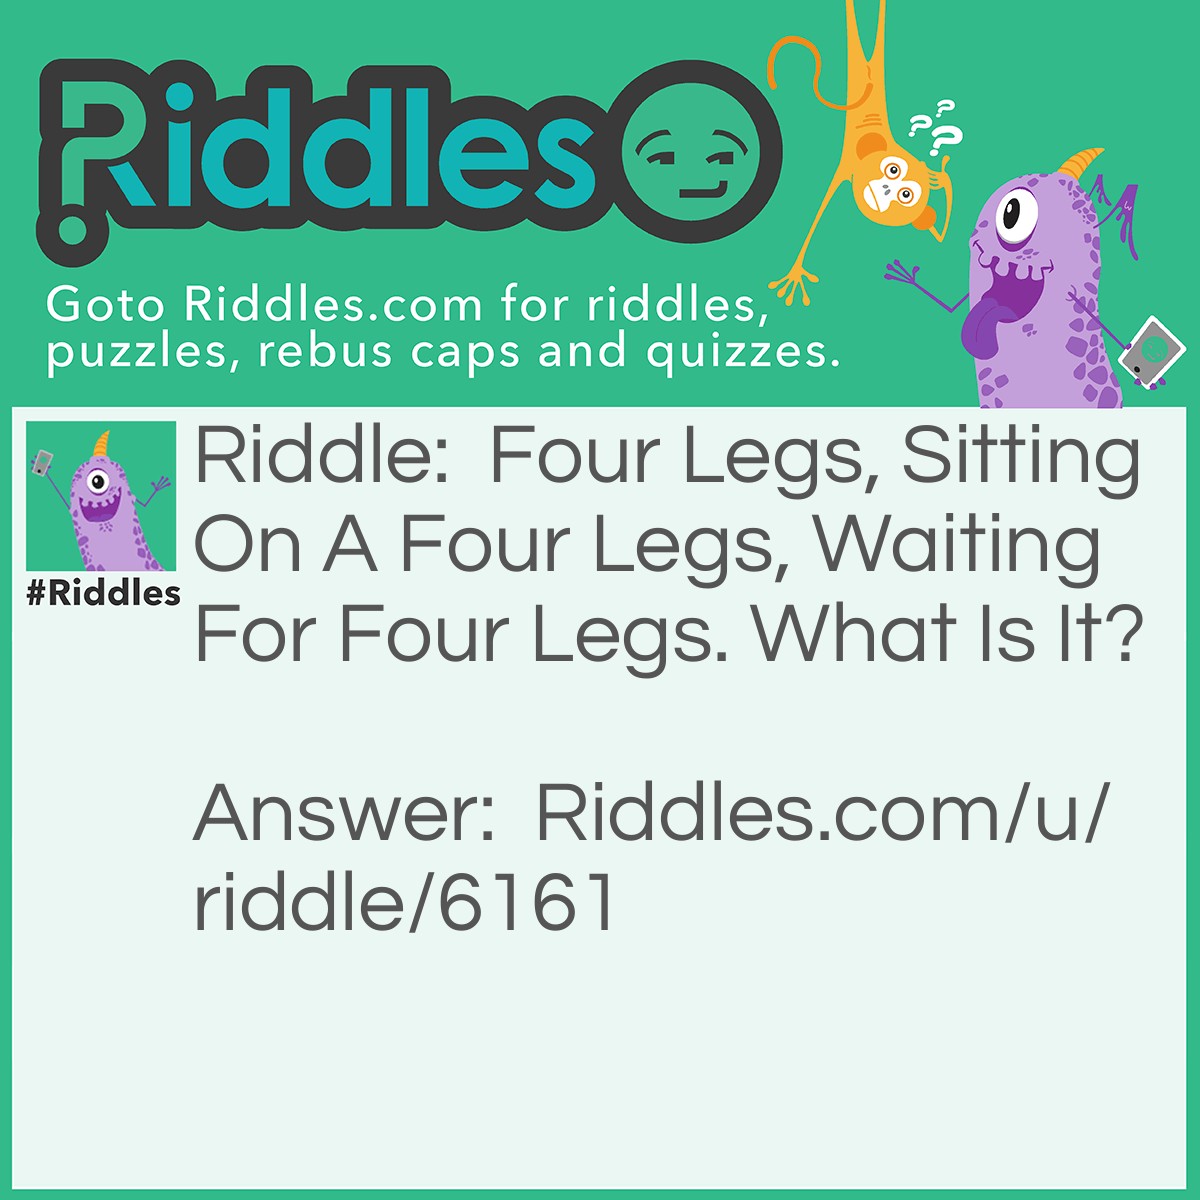 Riddle: Four Legs, Sitting On A Four Legs, Waiting For Four Legs. What Is It? Answer: A Cat Sitting On A Chair Waiting For A Rat.